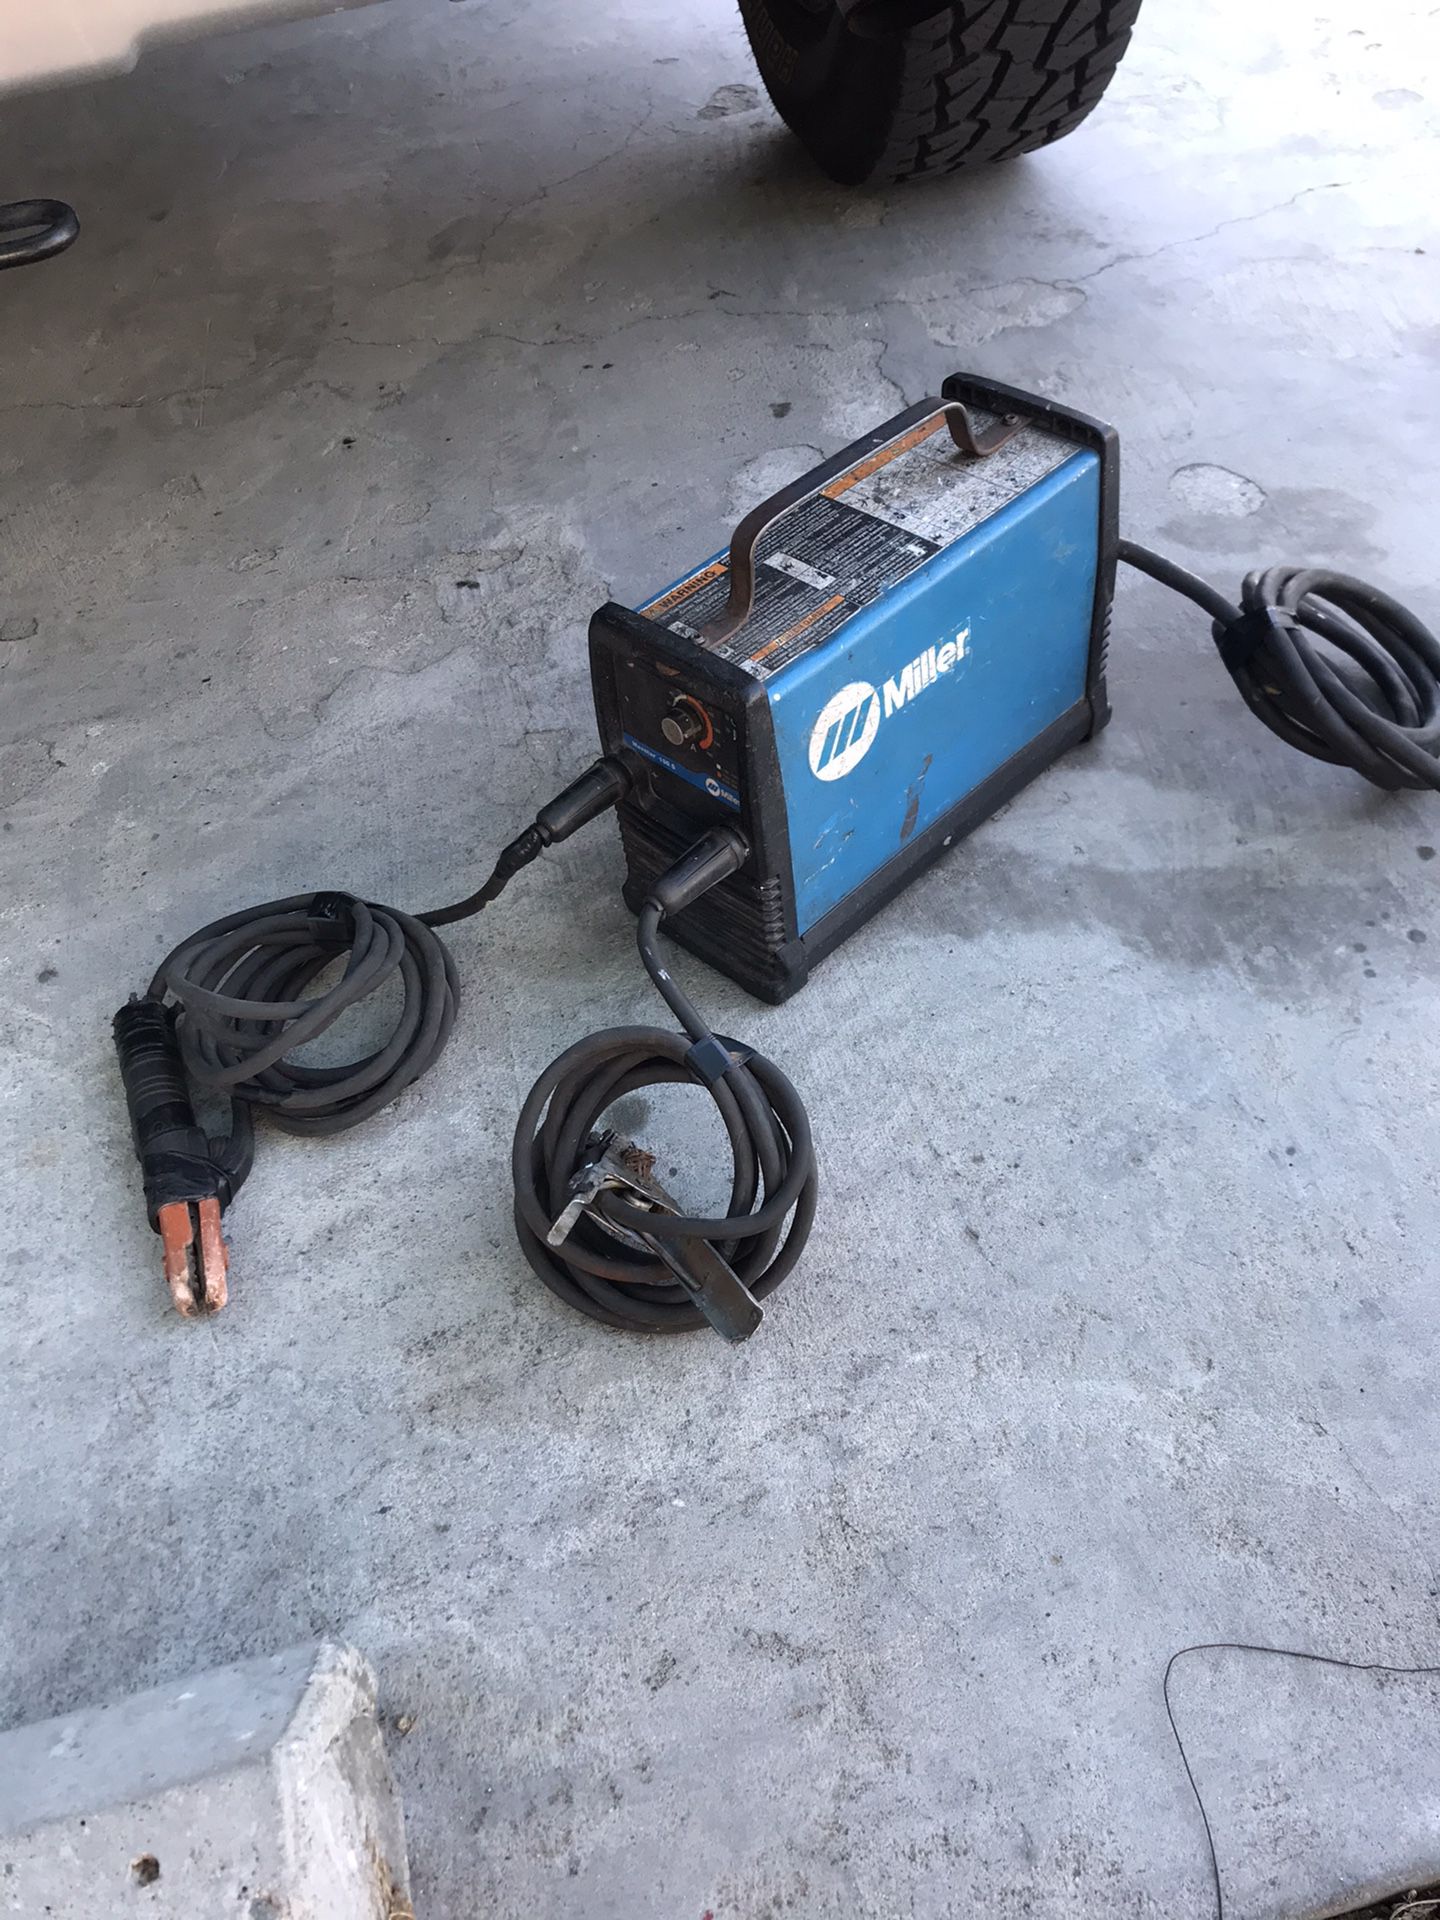 Miller maxstar 150s stock welder 110v in good condition you can test before buy it